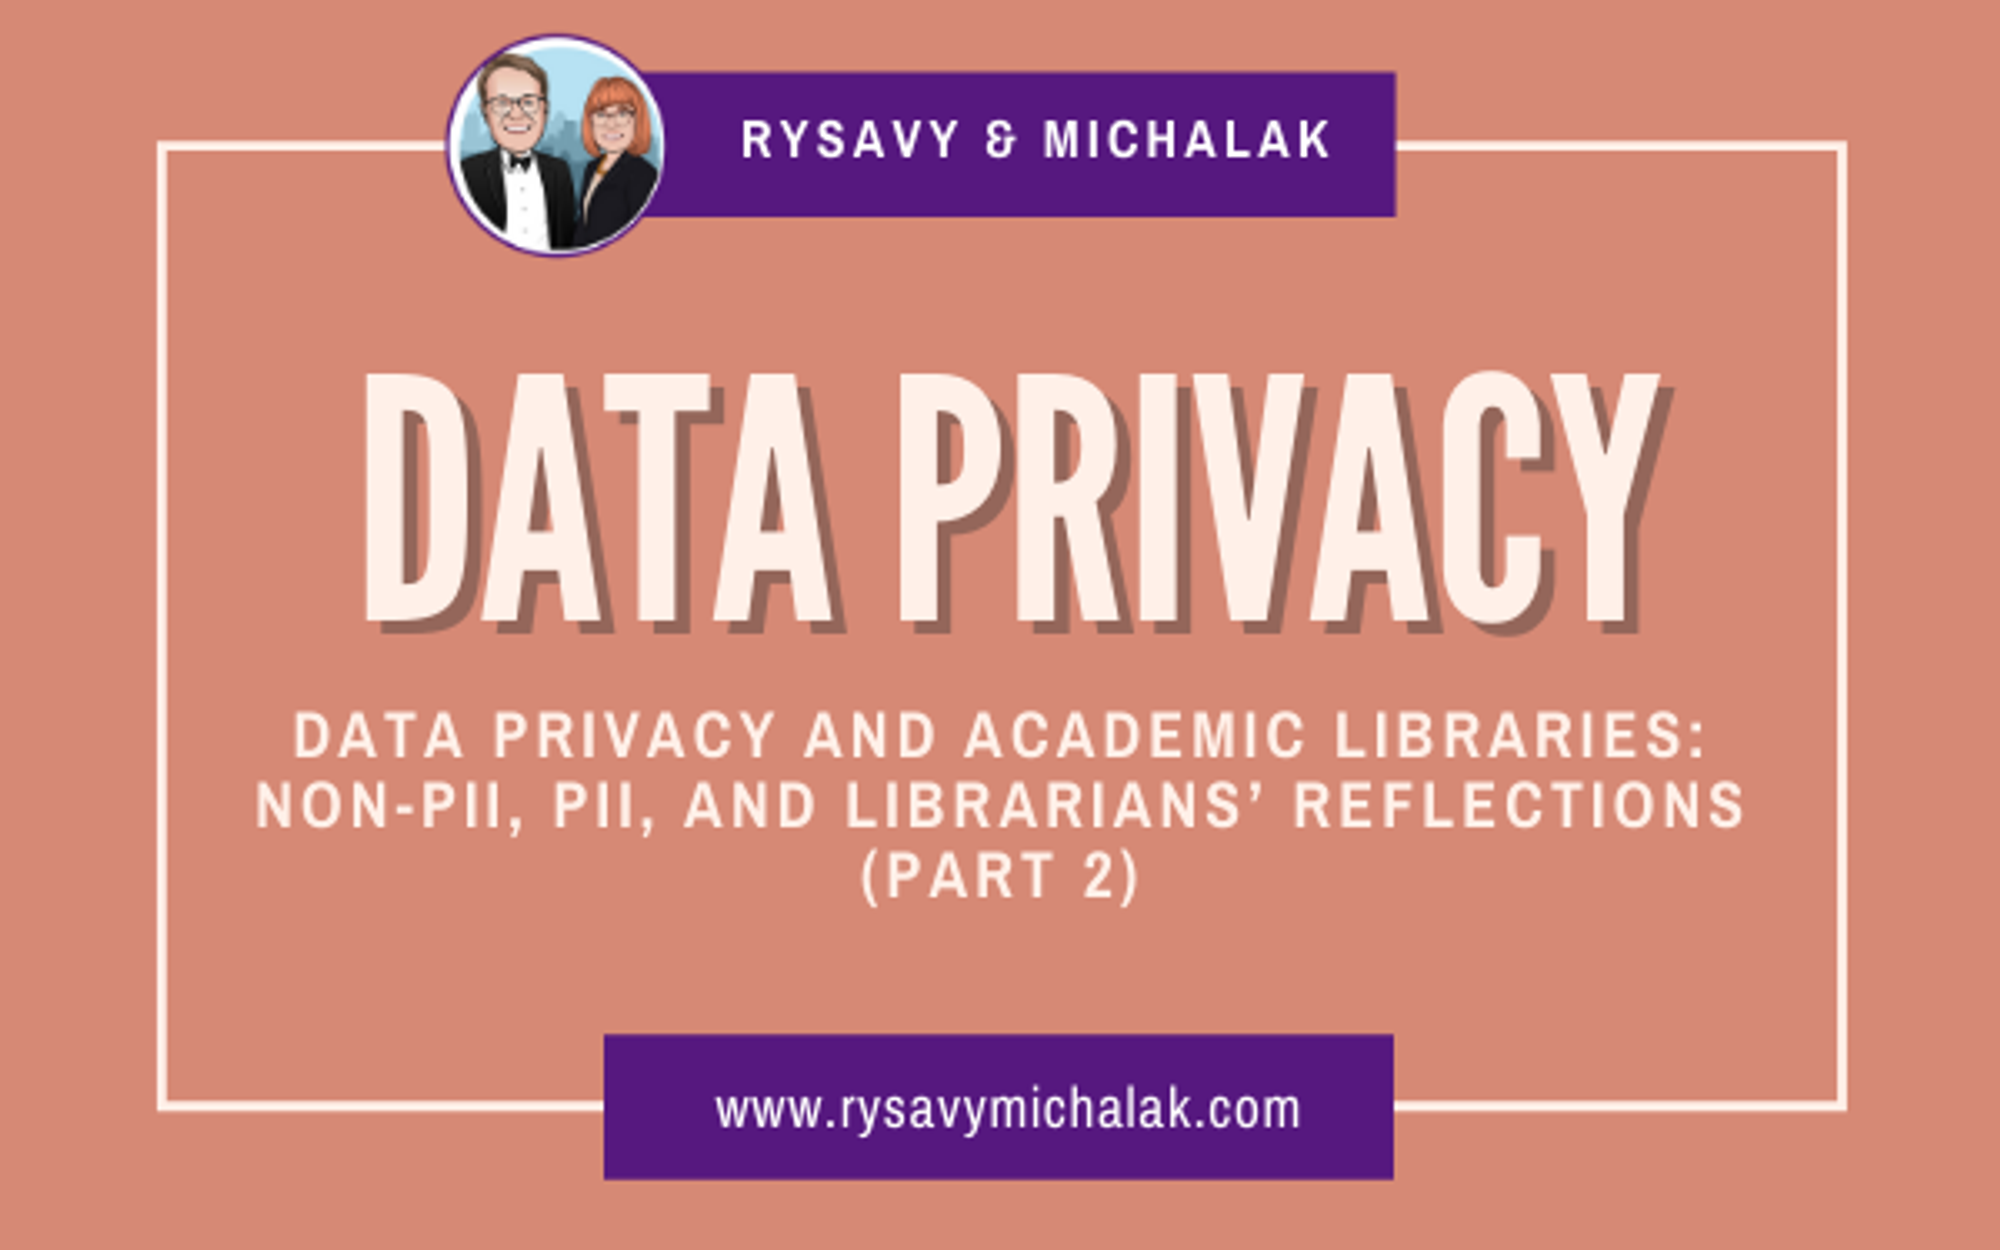 Data Privacy and Academic Libraries: Non-PII, PII, and Librarians’ Reflections (Part 2)